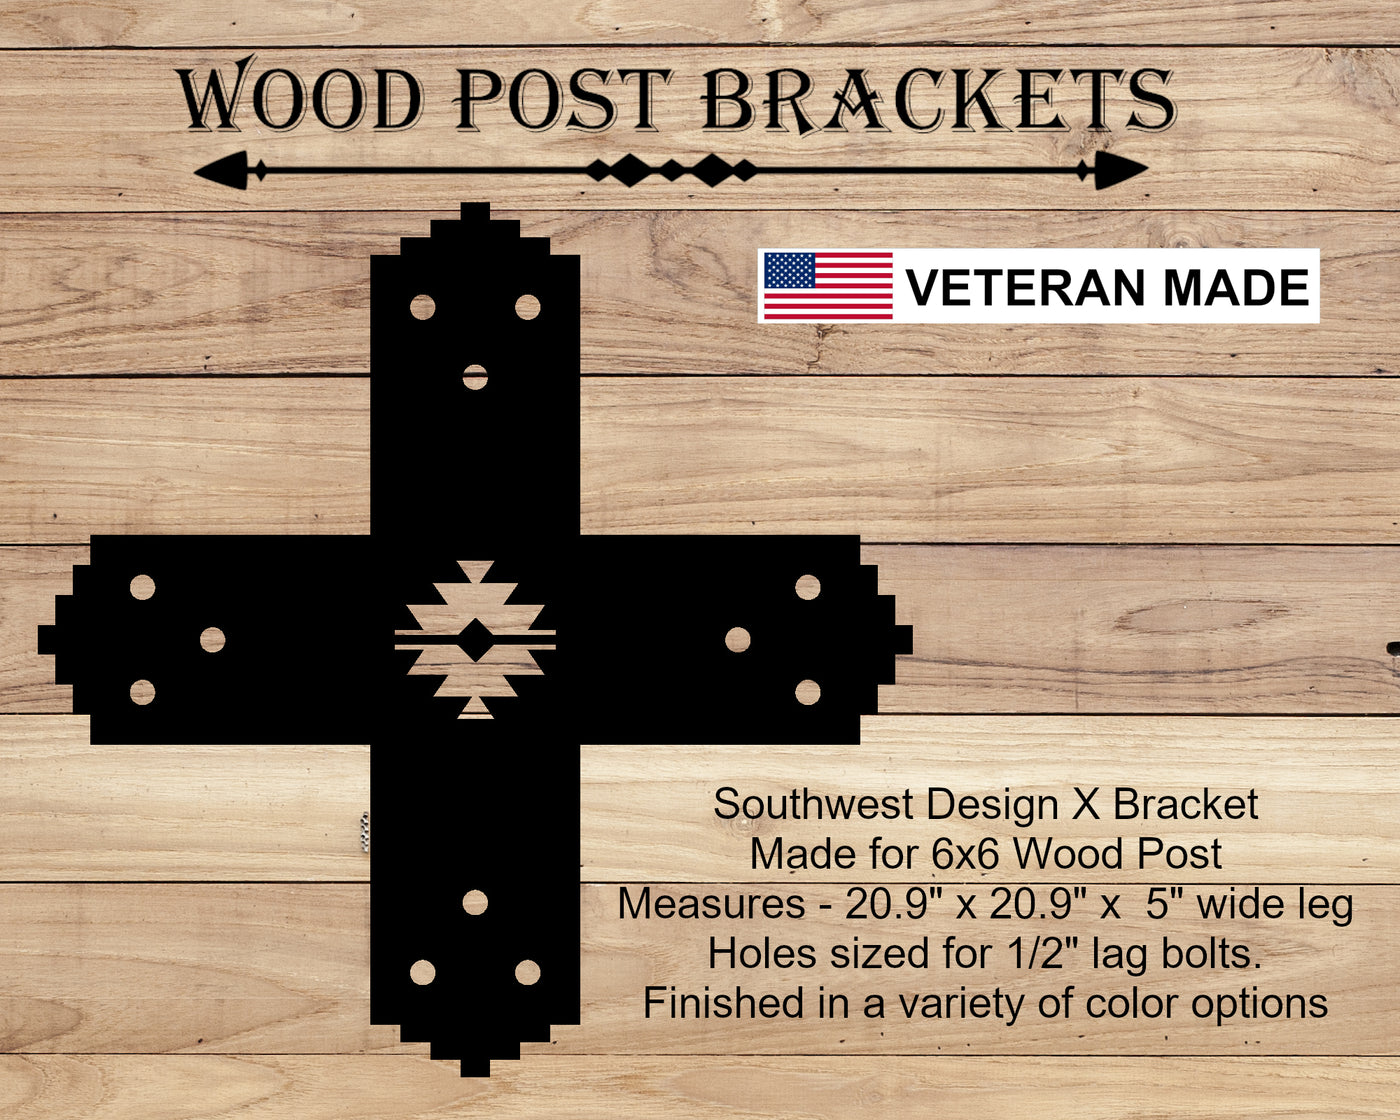 Southwest Style Brackets for 6" Post - Madison Iron and Wood - Brackets - metal outdoor decor - Steel deocrations - american made products - veteran owned business products - fencing decorations - fencing supplies - custom wall decorations - personalized wall signs - steel - decorative post caps - steel post caps - metal post caps - brackets - structural brackets - home improvement - easter - easter decorations - easter gift - easter yard decor